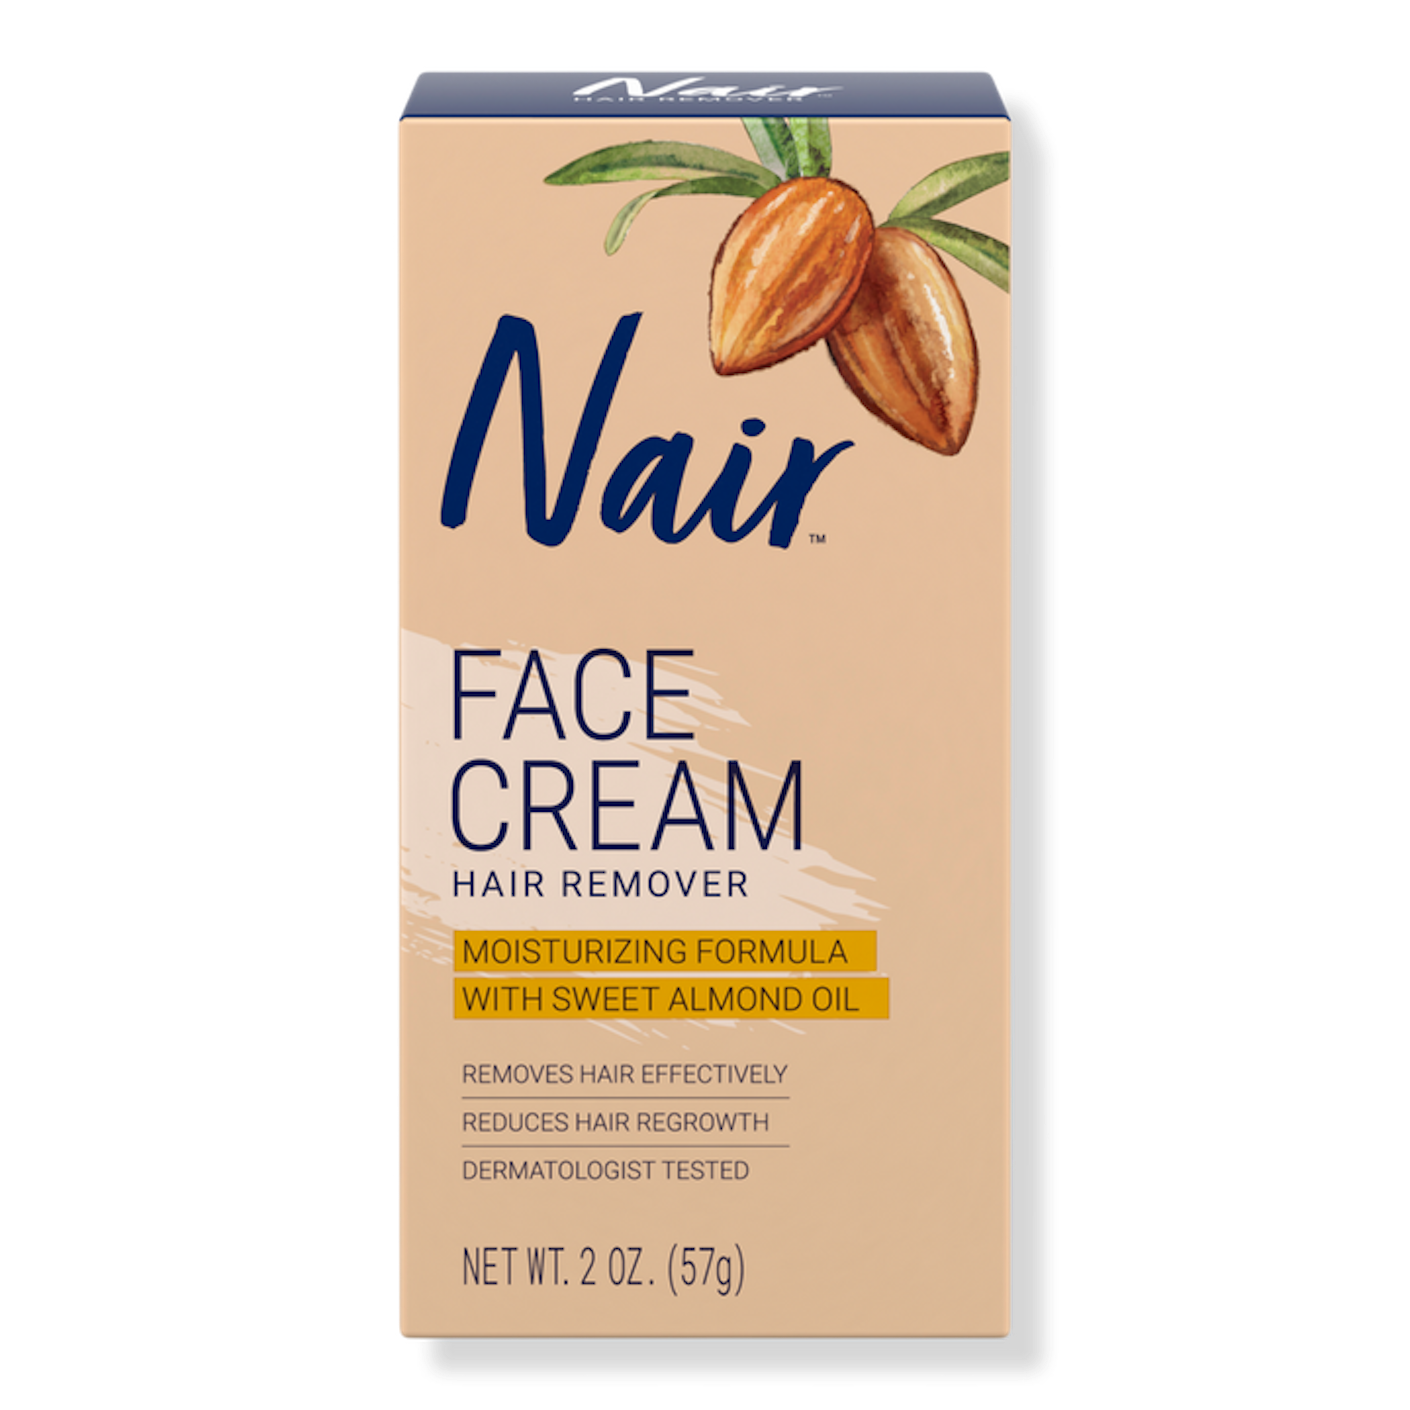 A taupe, cardboard box of Nair face cream is pictured.